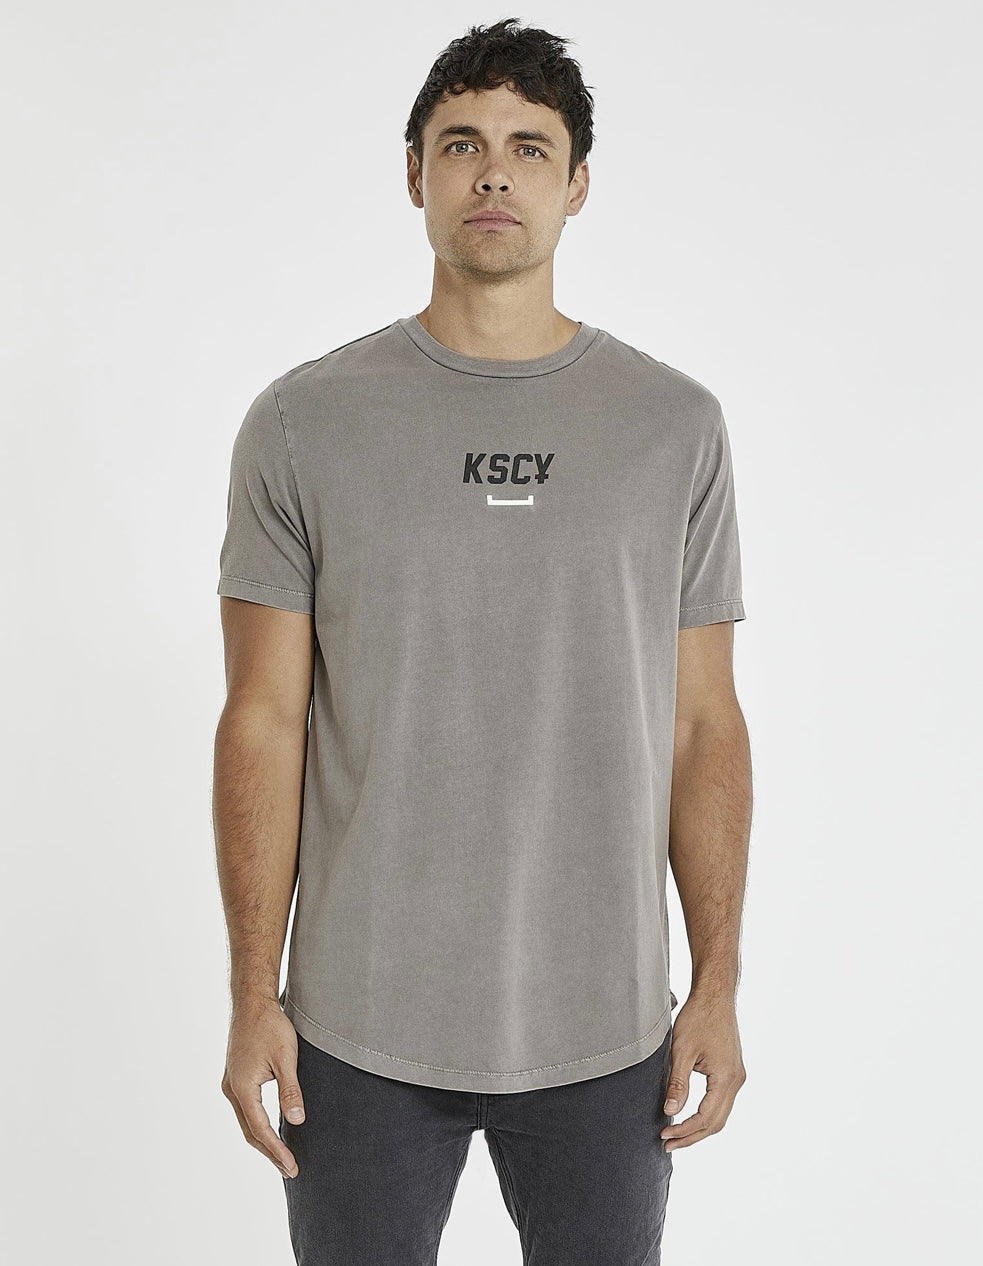 Kiss Chacey Formula Dual Curved Tee- Pigment Iron – Husk Him Her